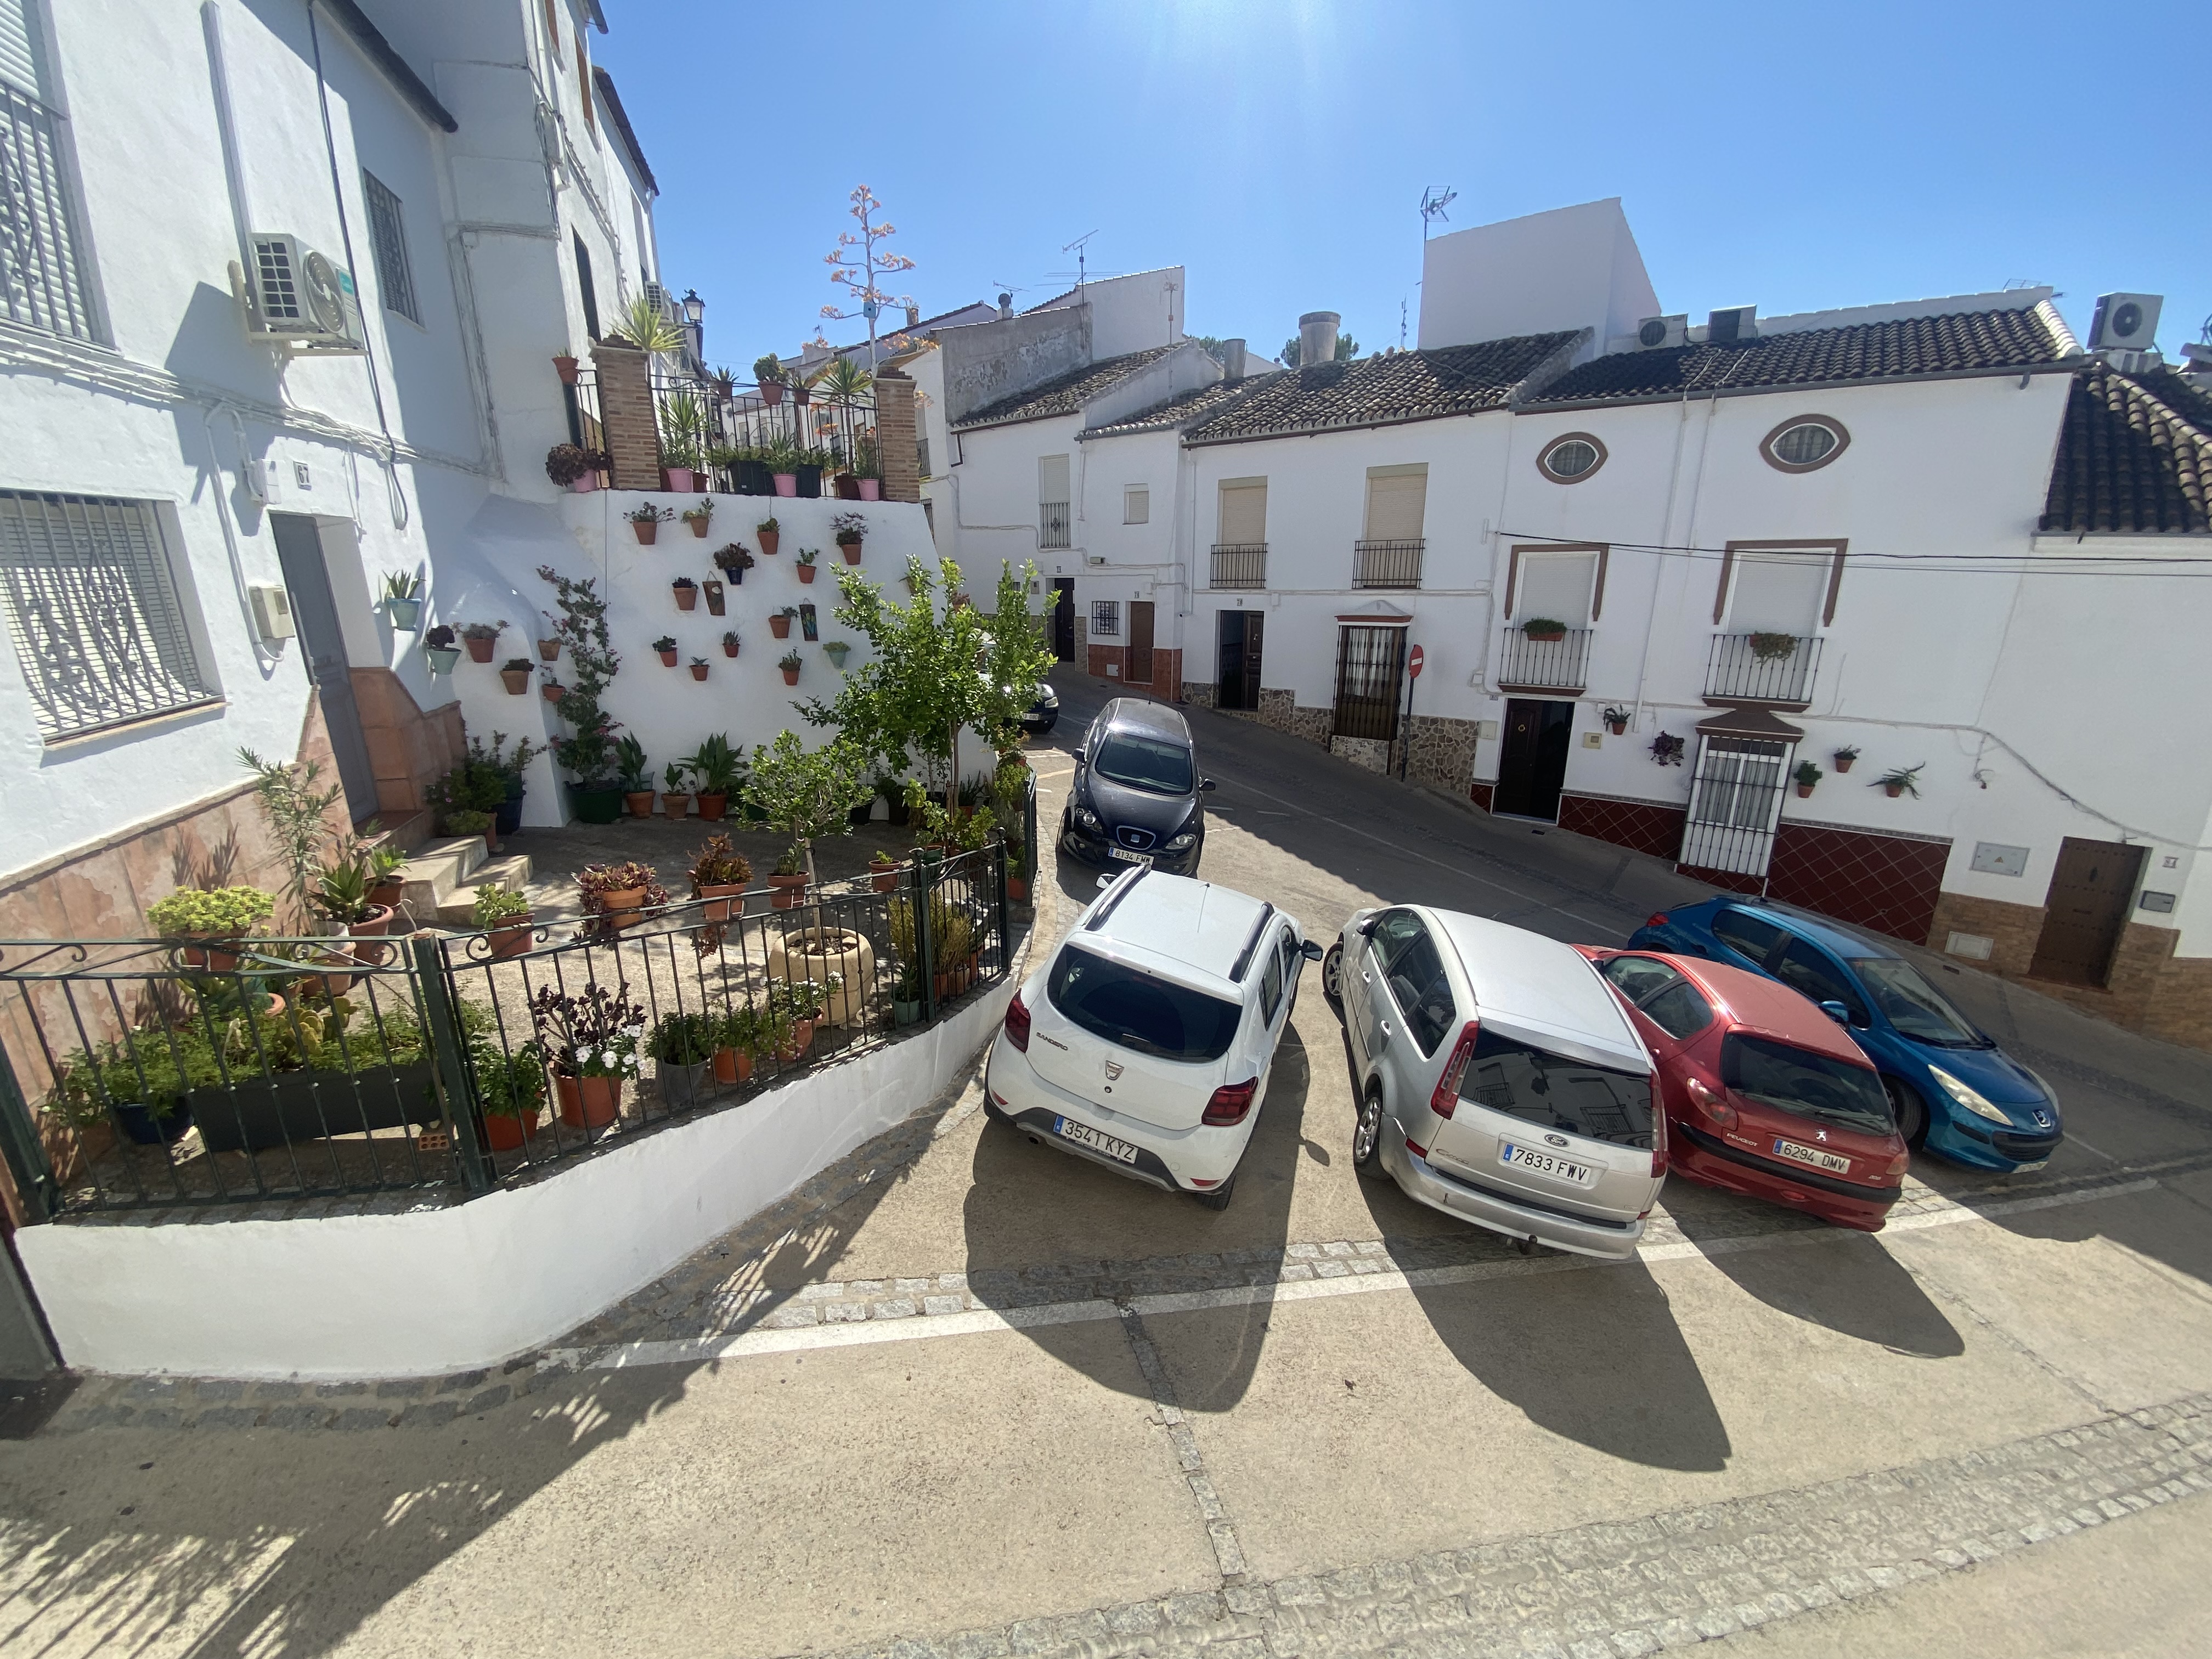 4 Bed, 1 Bath, HouseFor Sale, Olvera, Andalucia